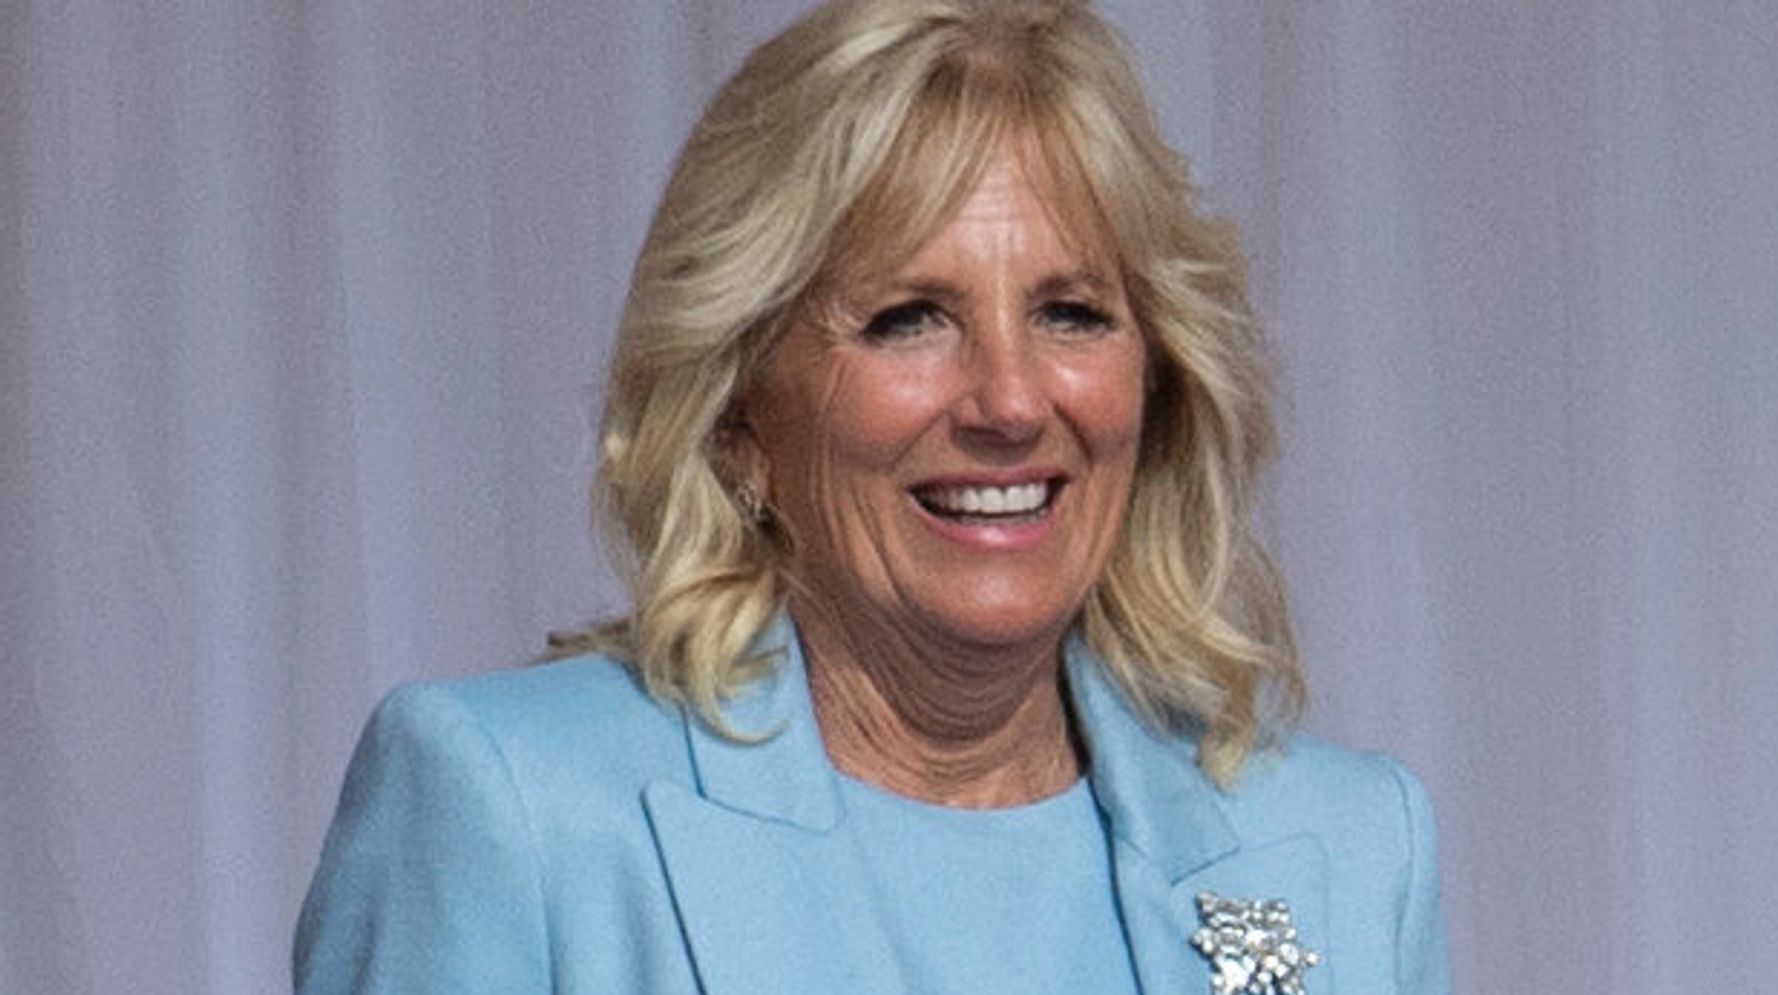 Jill Biden’s 'United' Message To U.S. Olympians: We Are More Than Our Political Parties